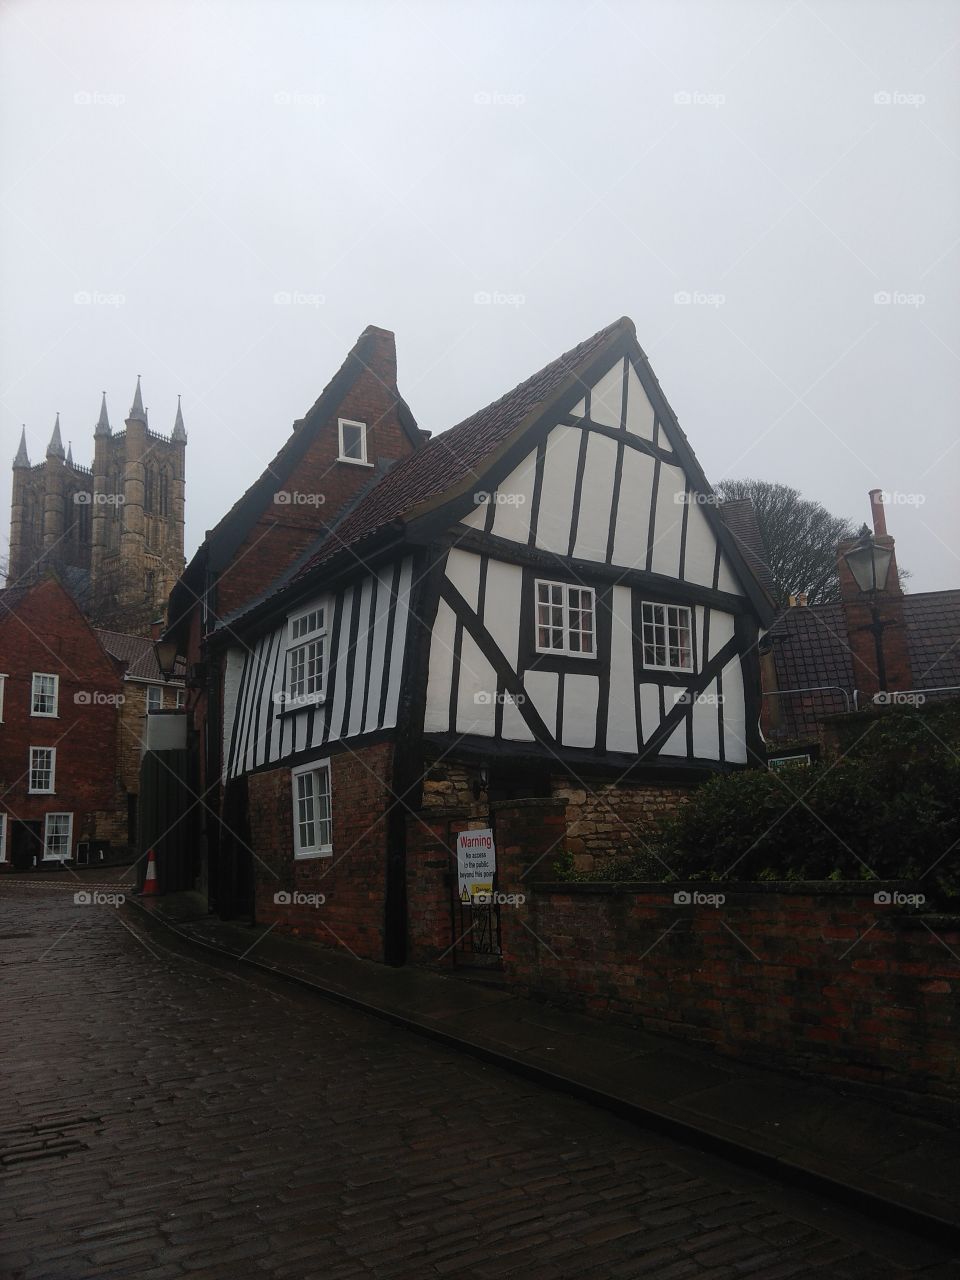 Fancy house in Lincoln, England with Lincoln cathedral in the distance